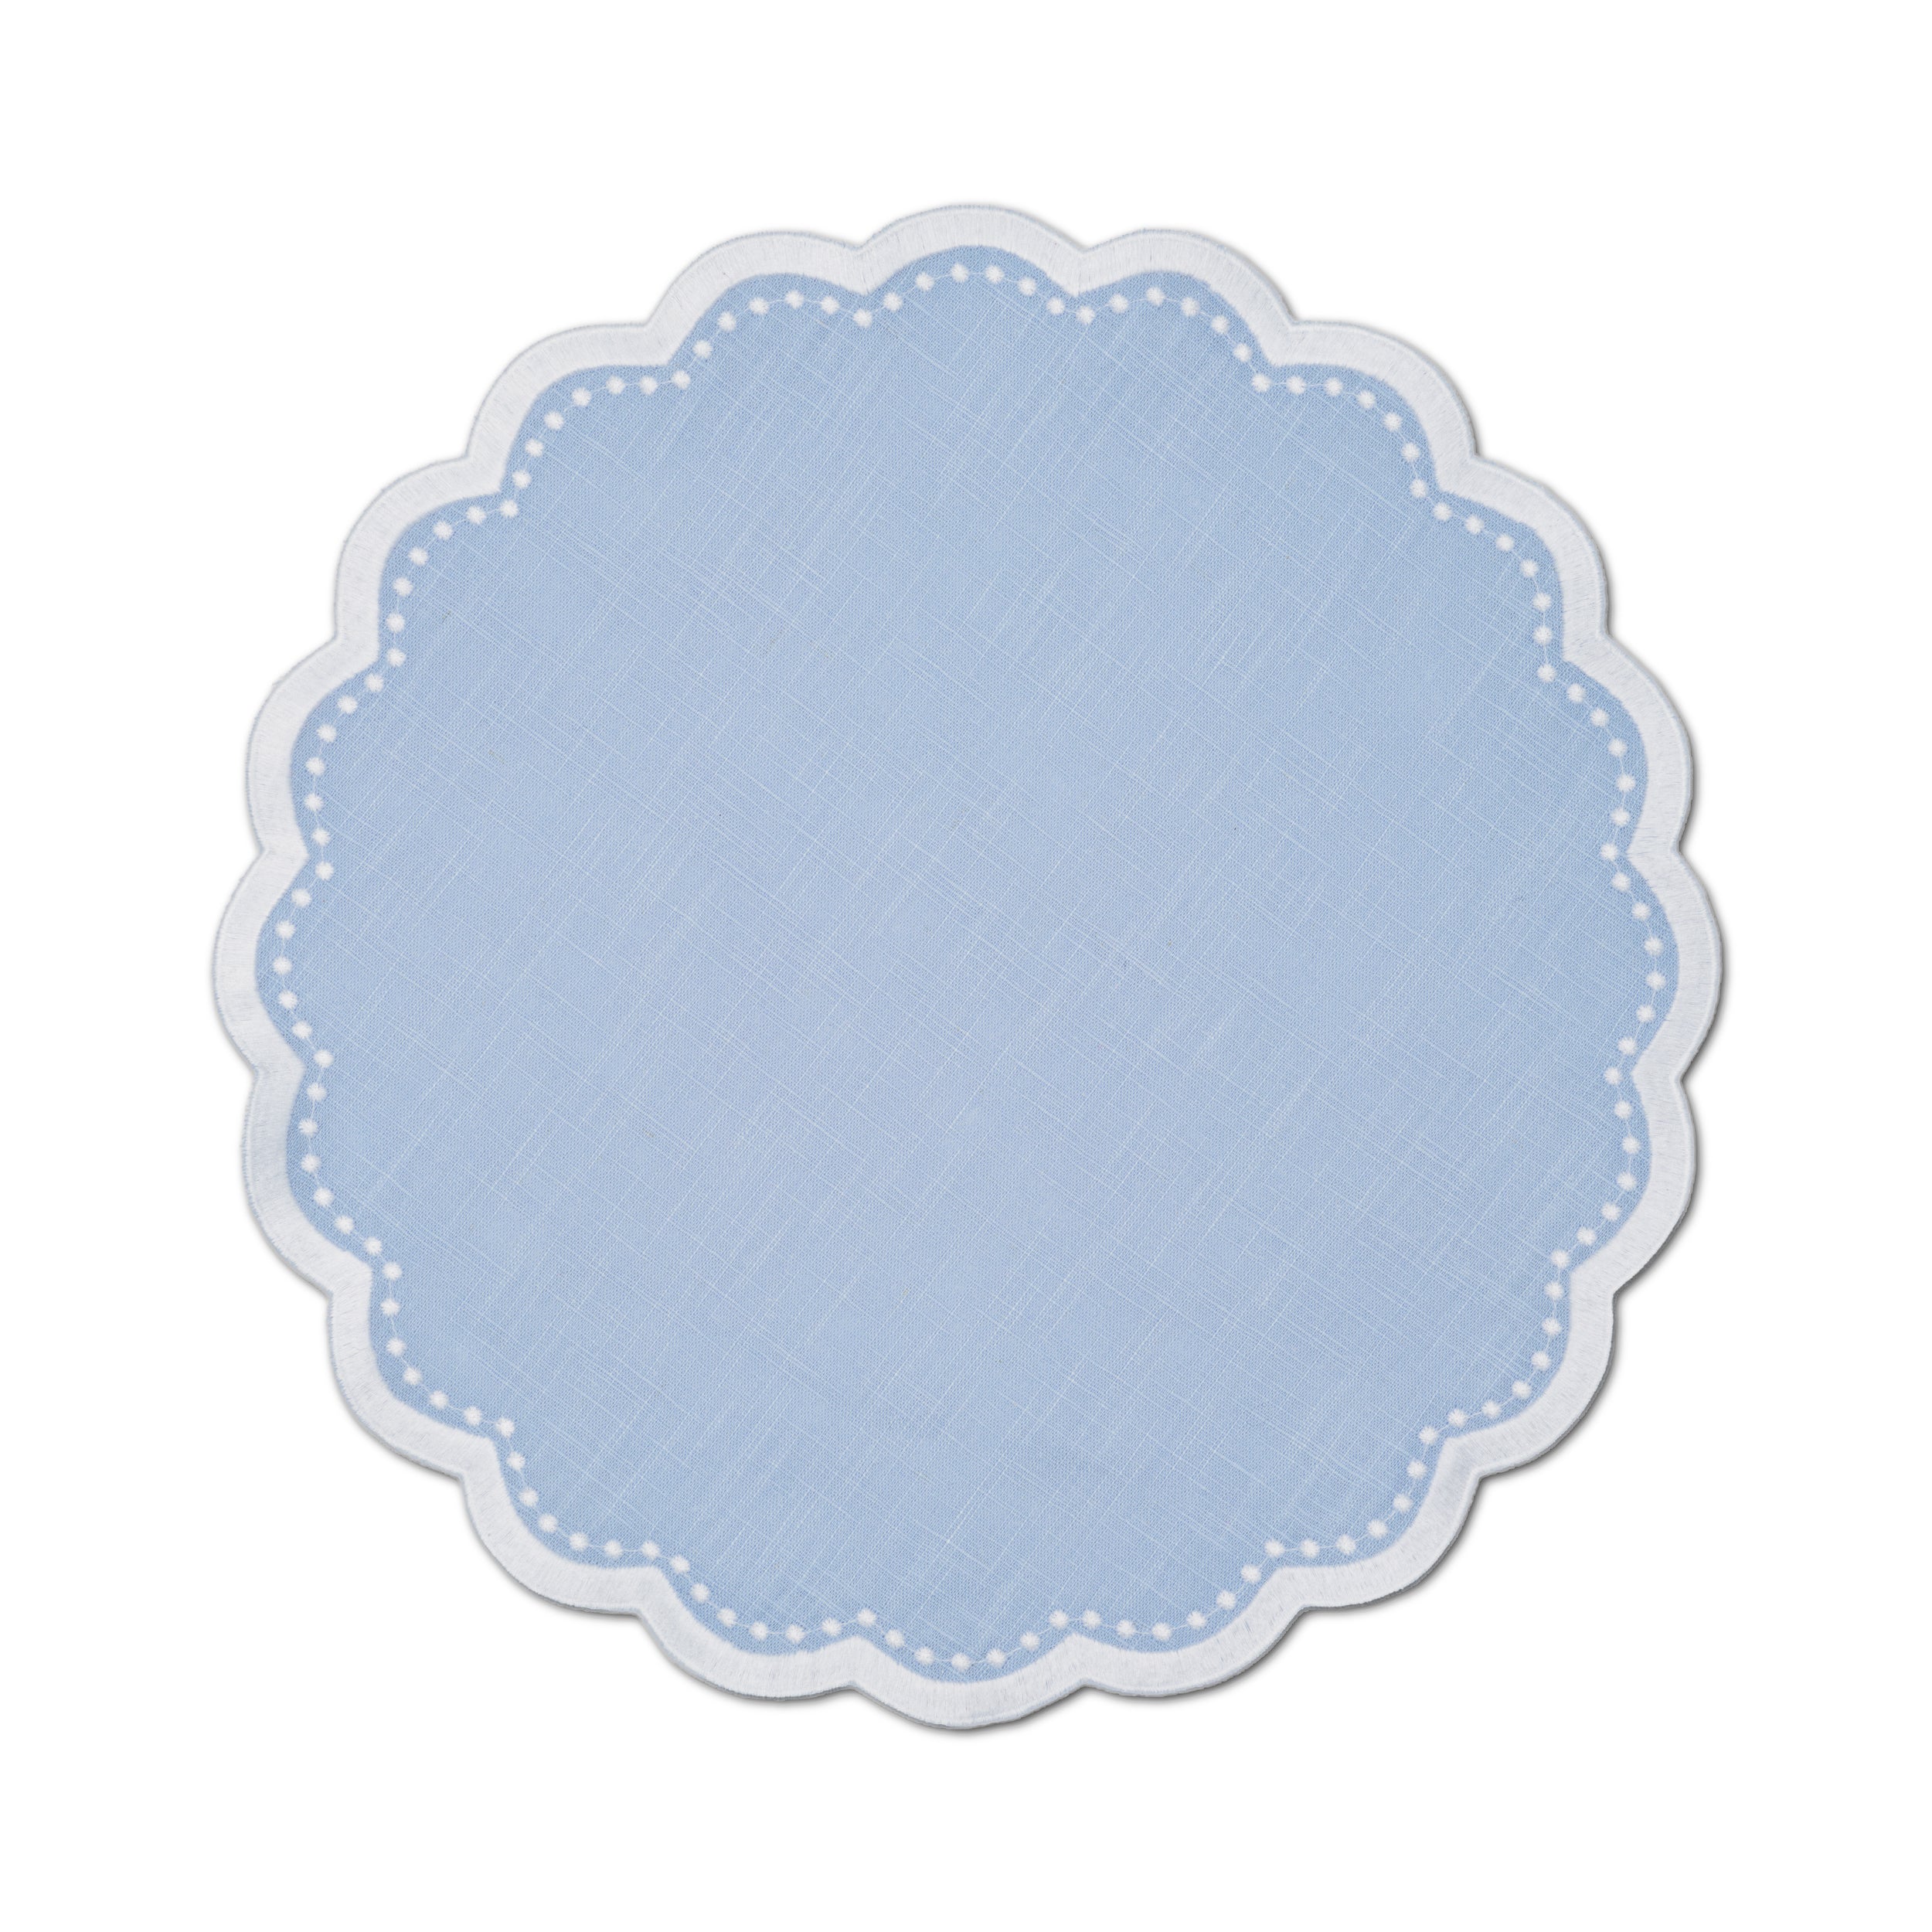 Bluebell Placemat | Light Blue - set of 4